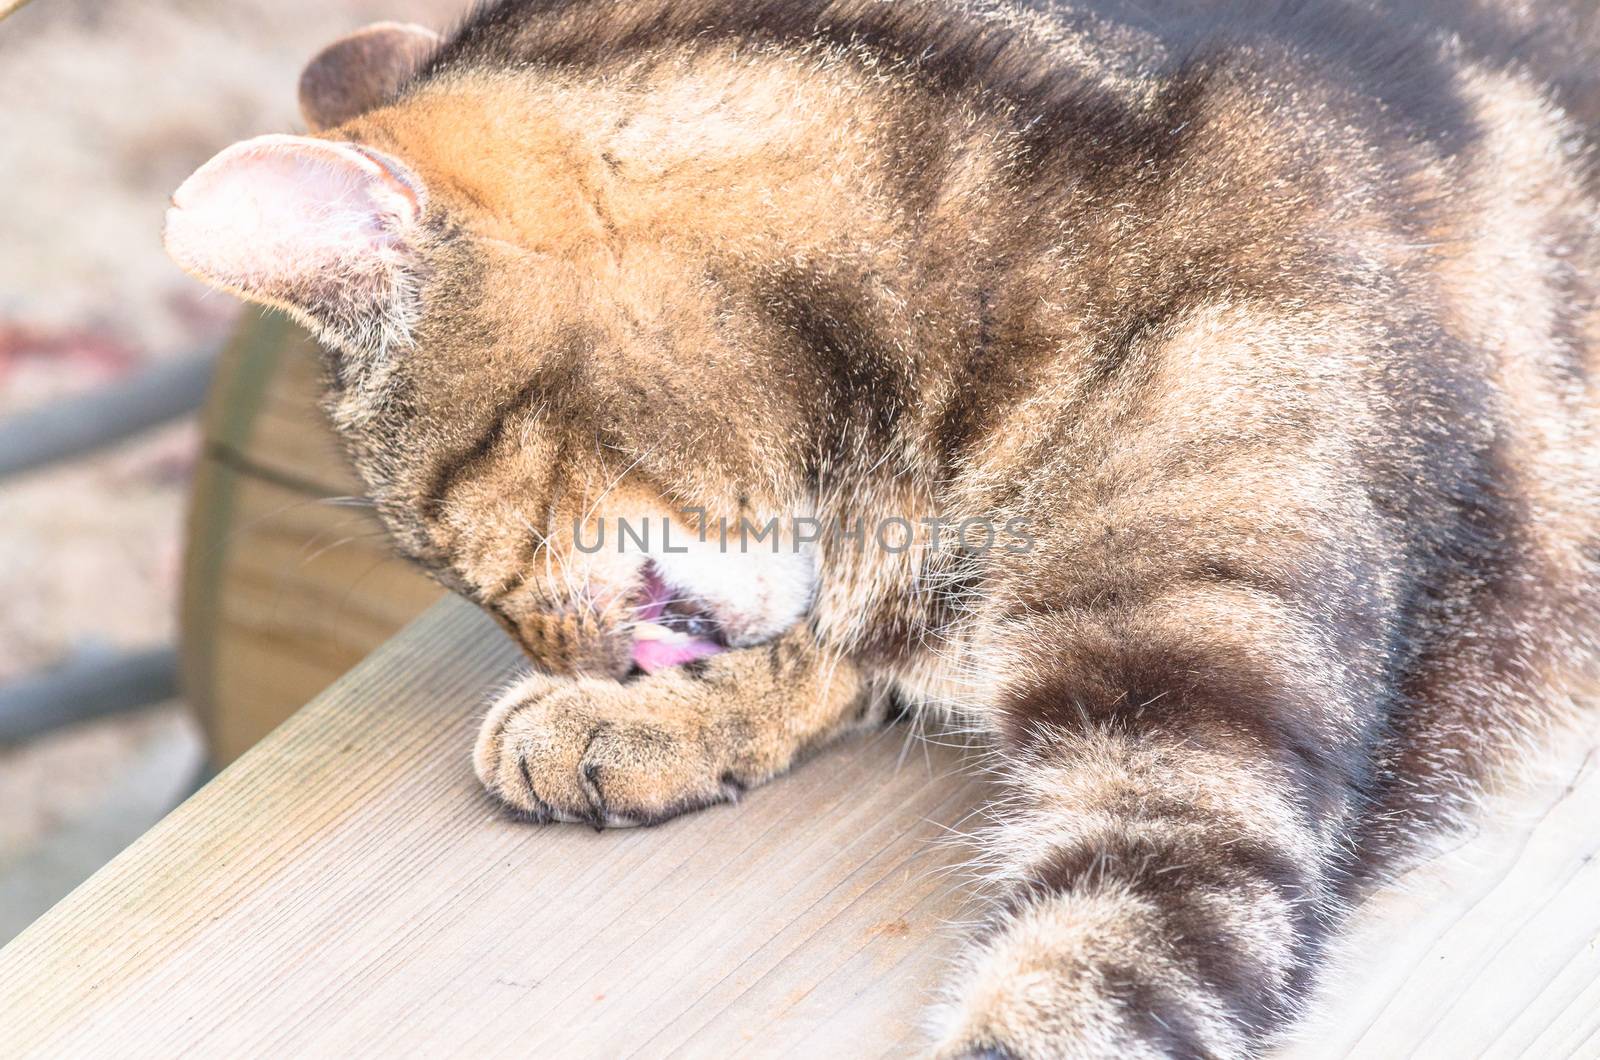 Large domestic cat on a wooden bench outdoors in cat grooming
